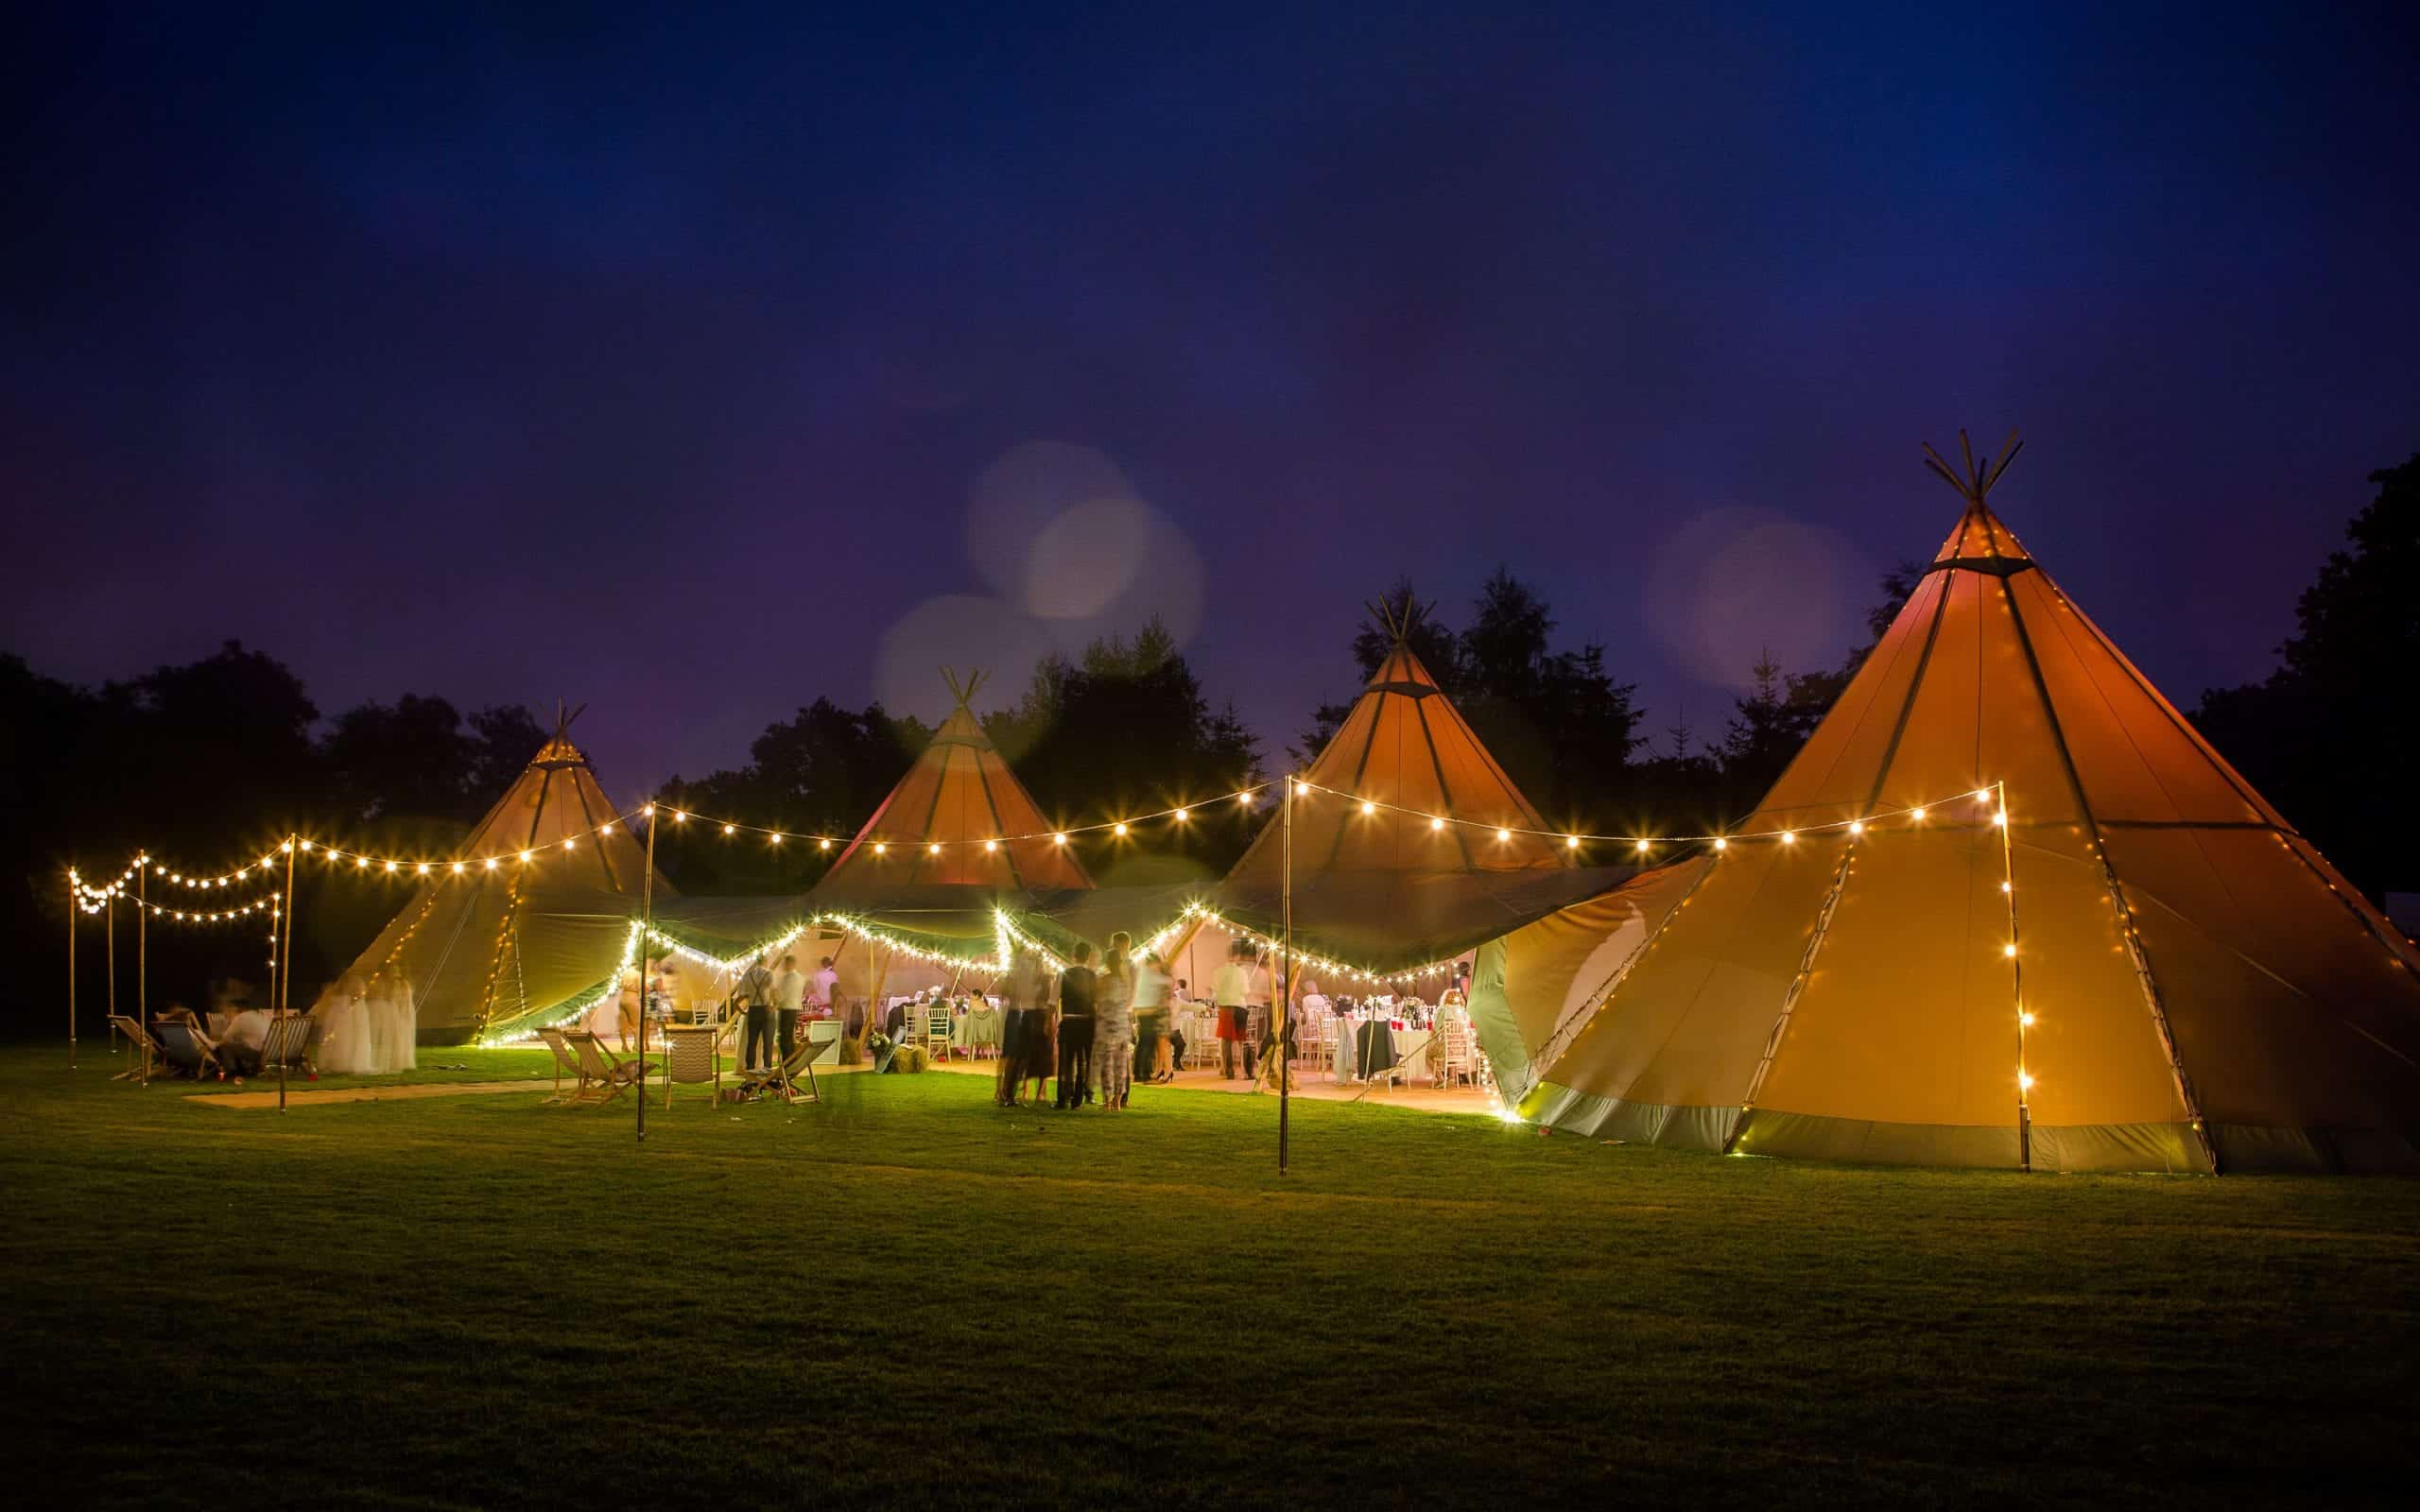 Elite Tents Tipi's on a farm in Warwickshire - lit up at night.